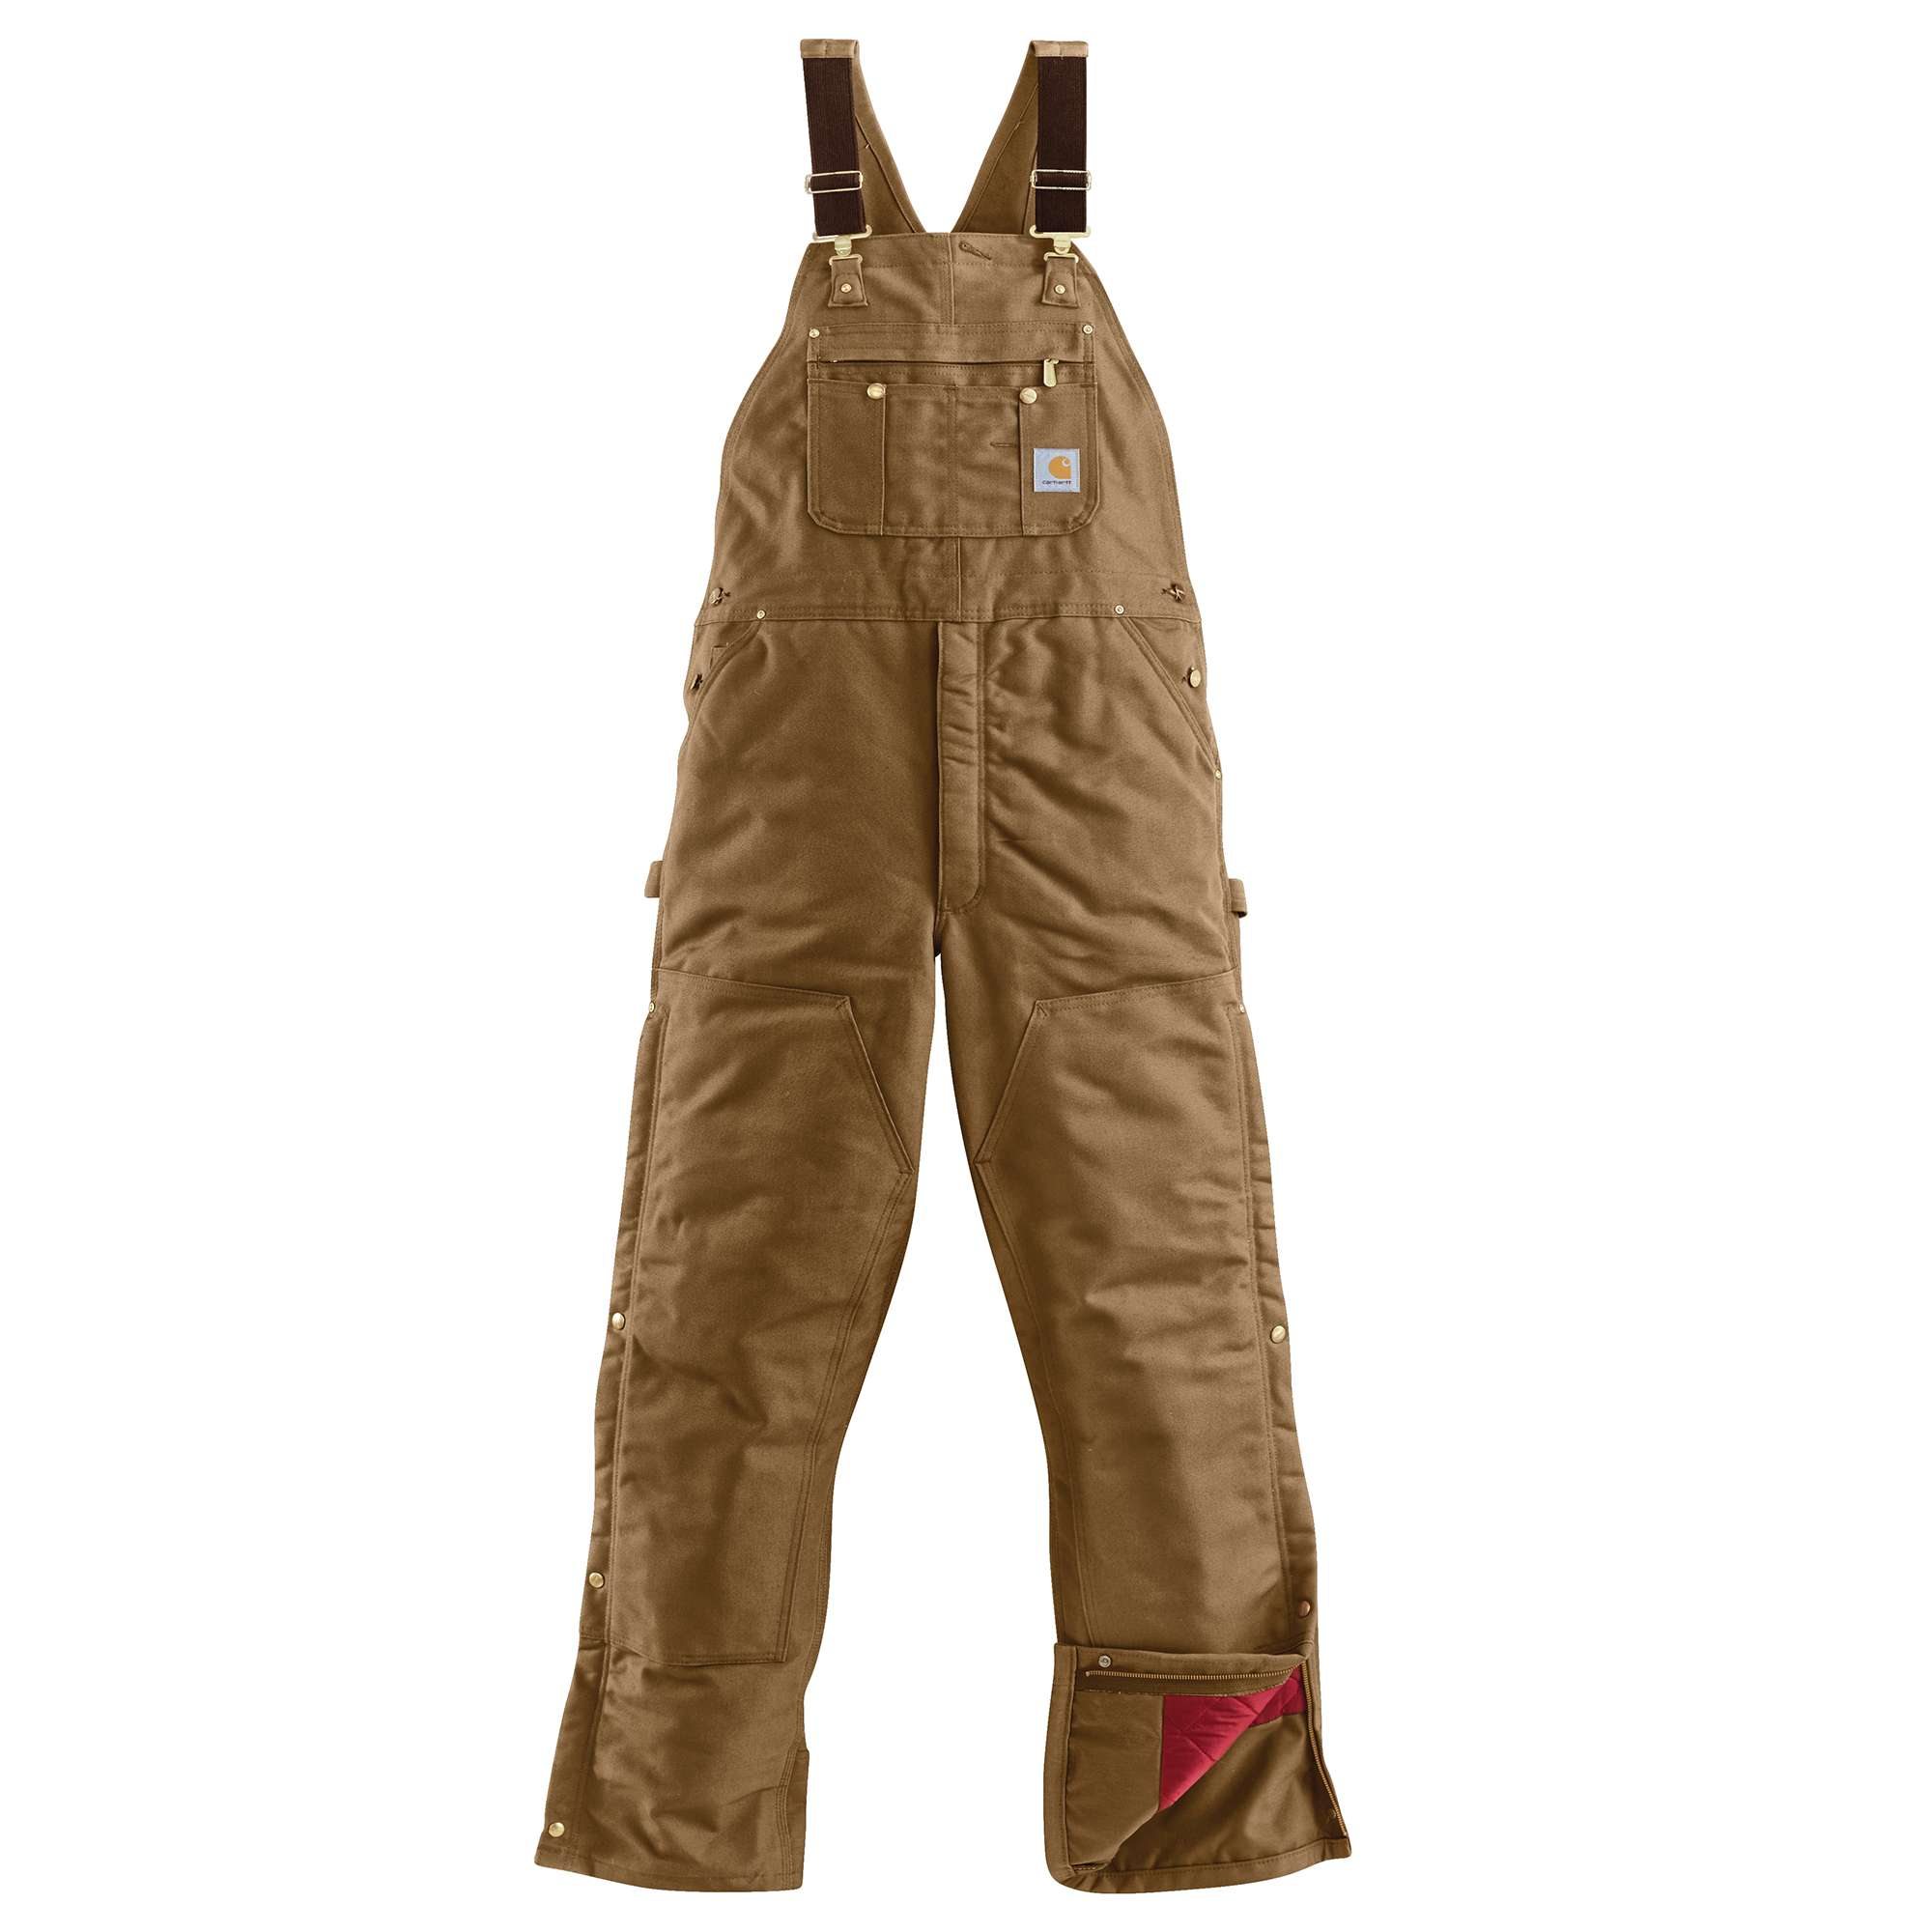 The bibs that built the brand - Carhartt.com Email Archive